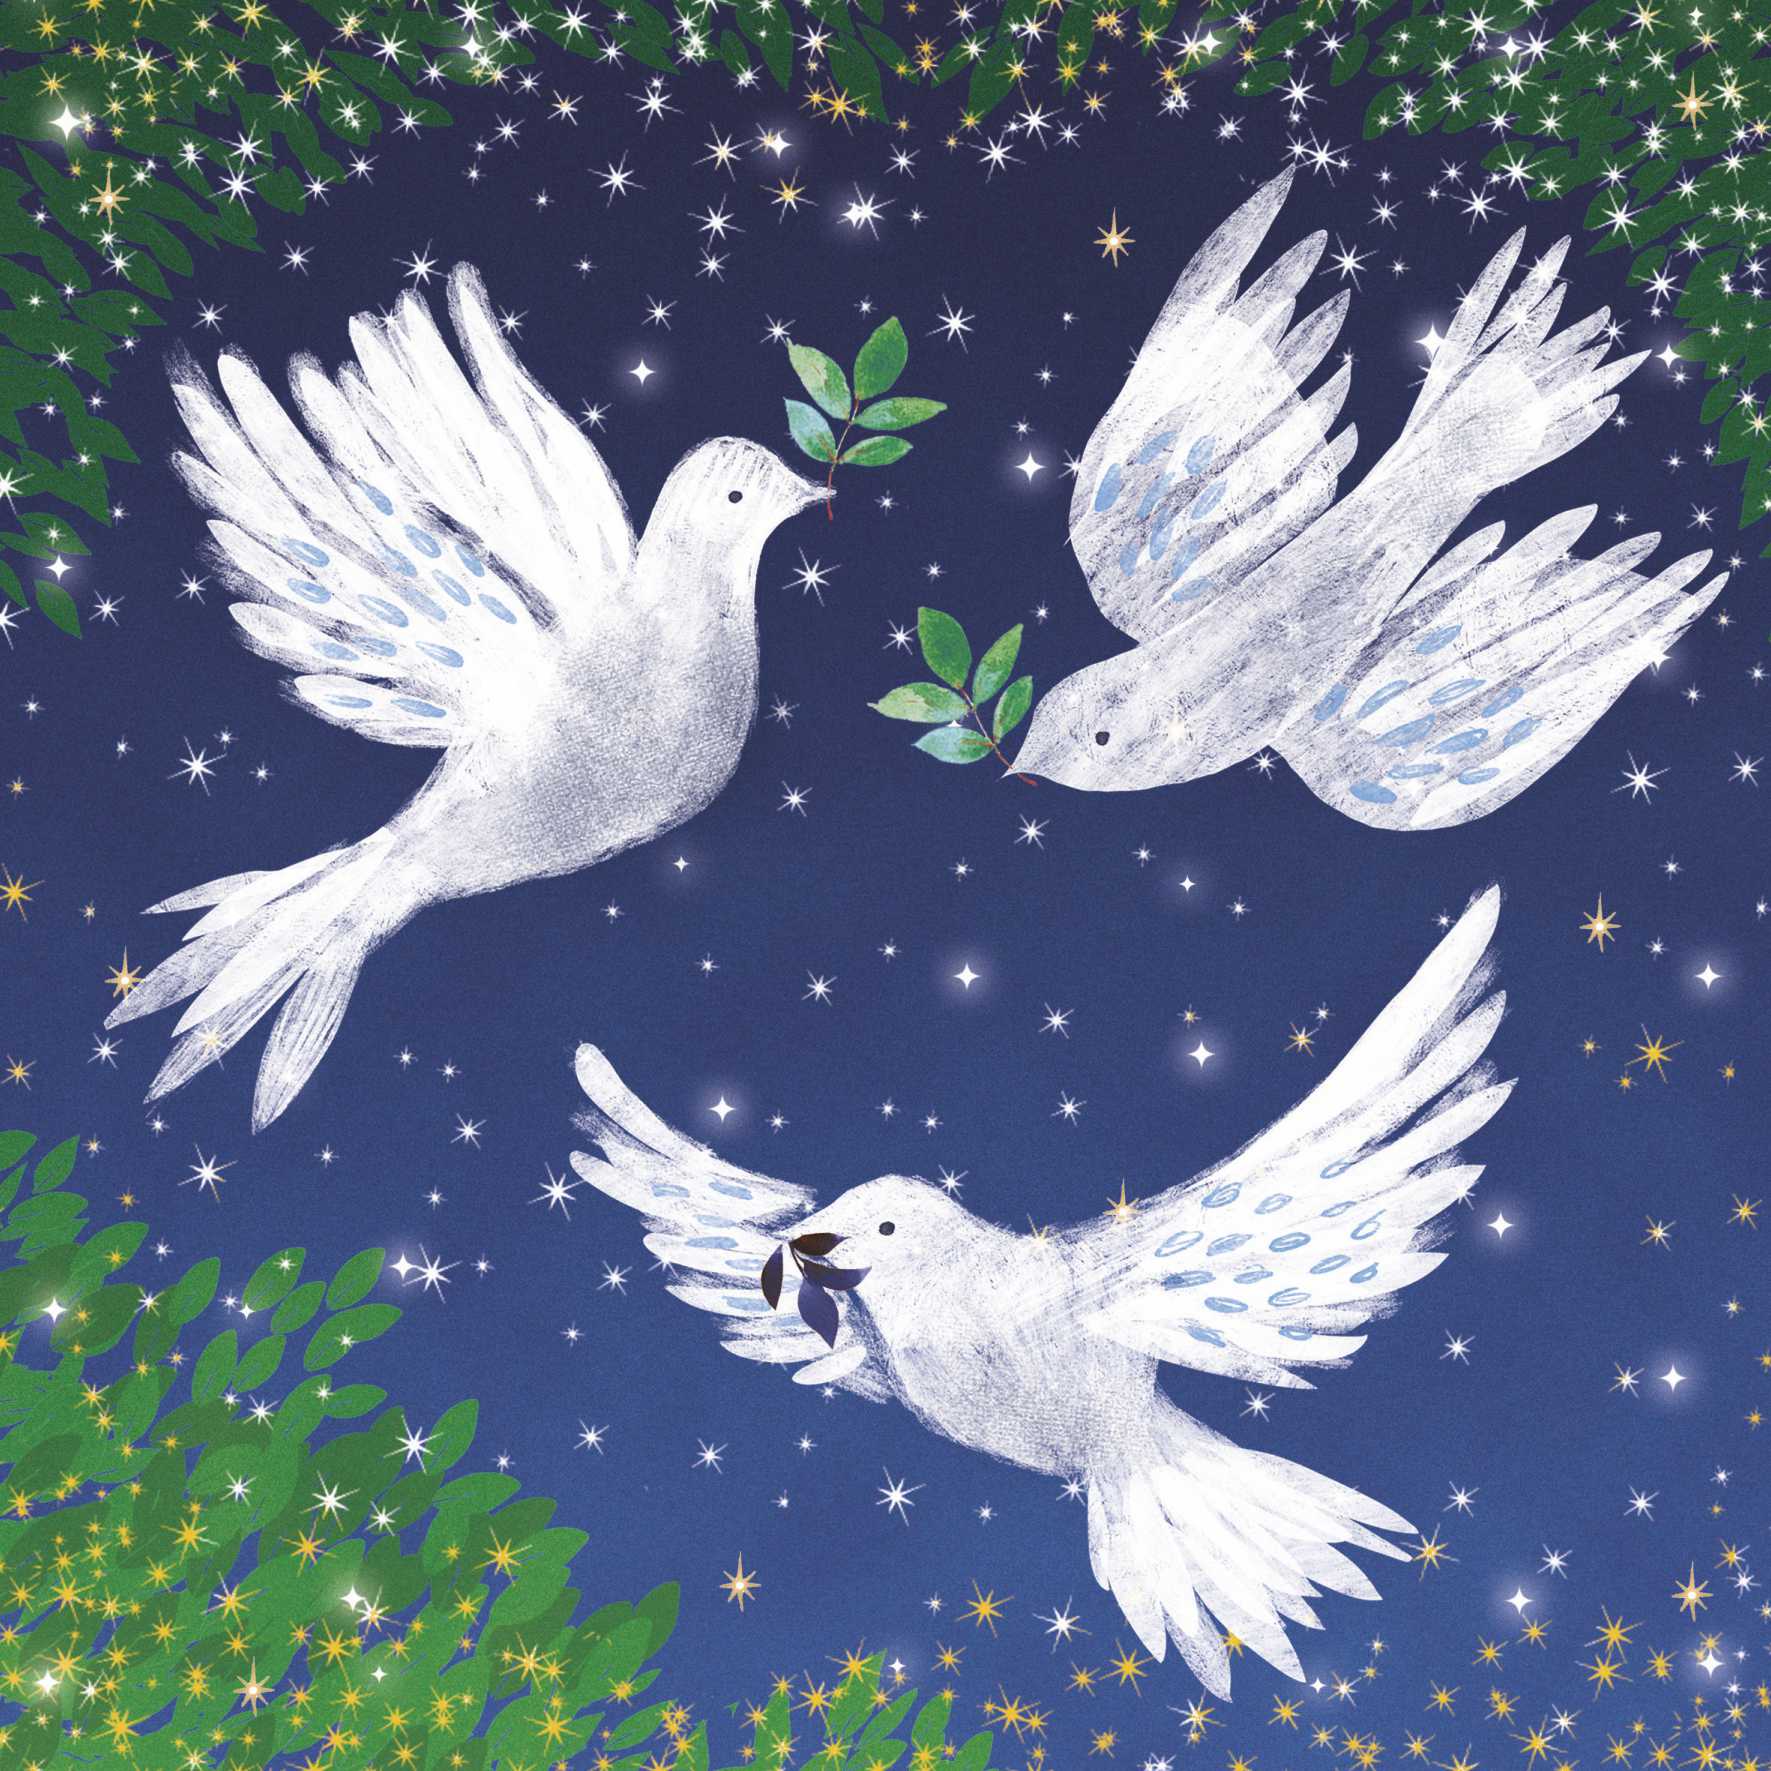 Illustration. A dark blue background with small stars. Three doves are flying with small olive branches in their beaks. Green leaves are around the edges.